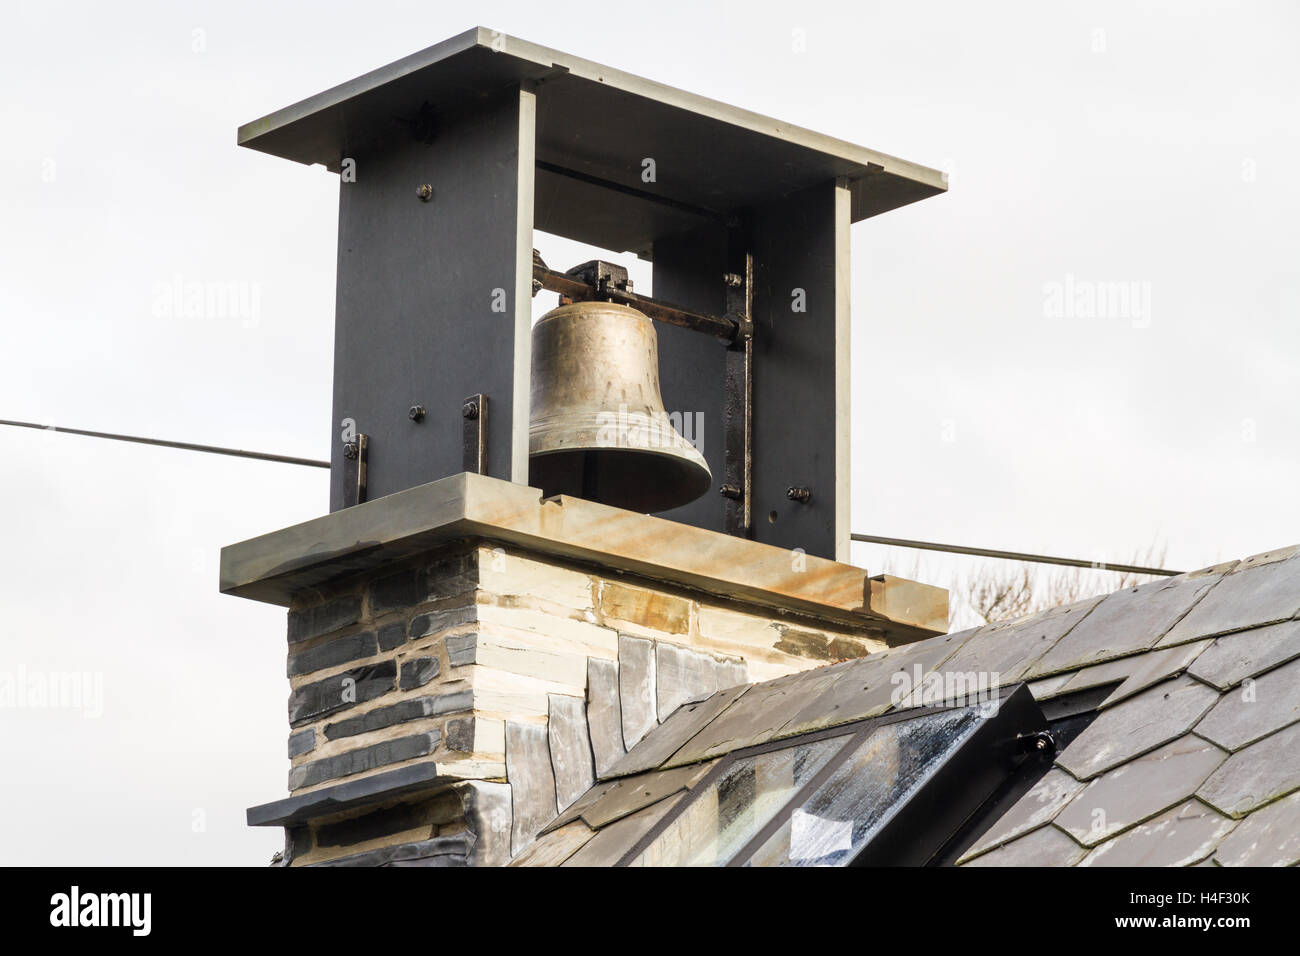 Small bell in tower Stock Photo